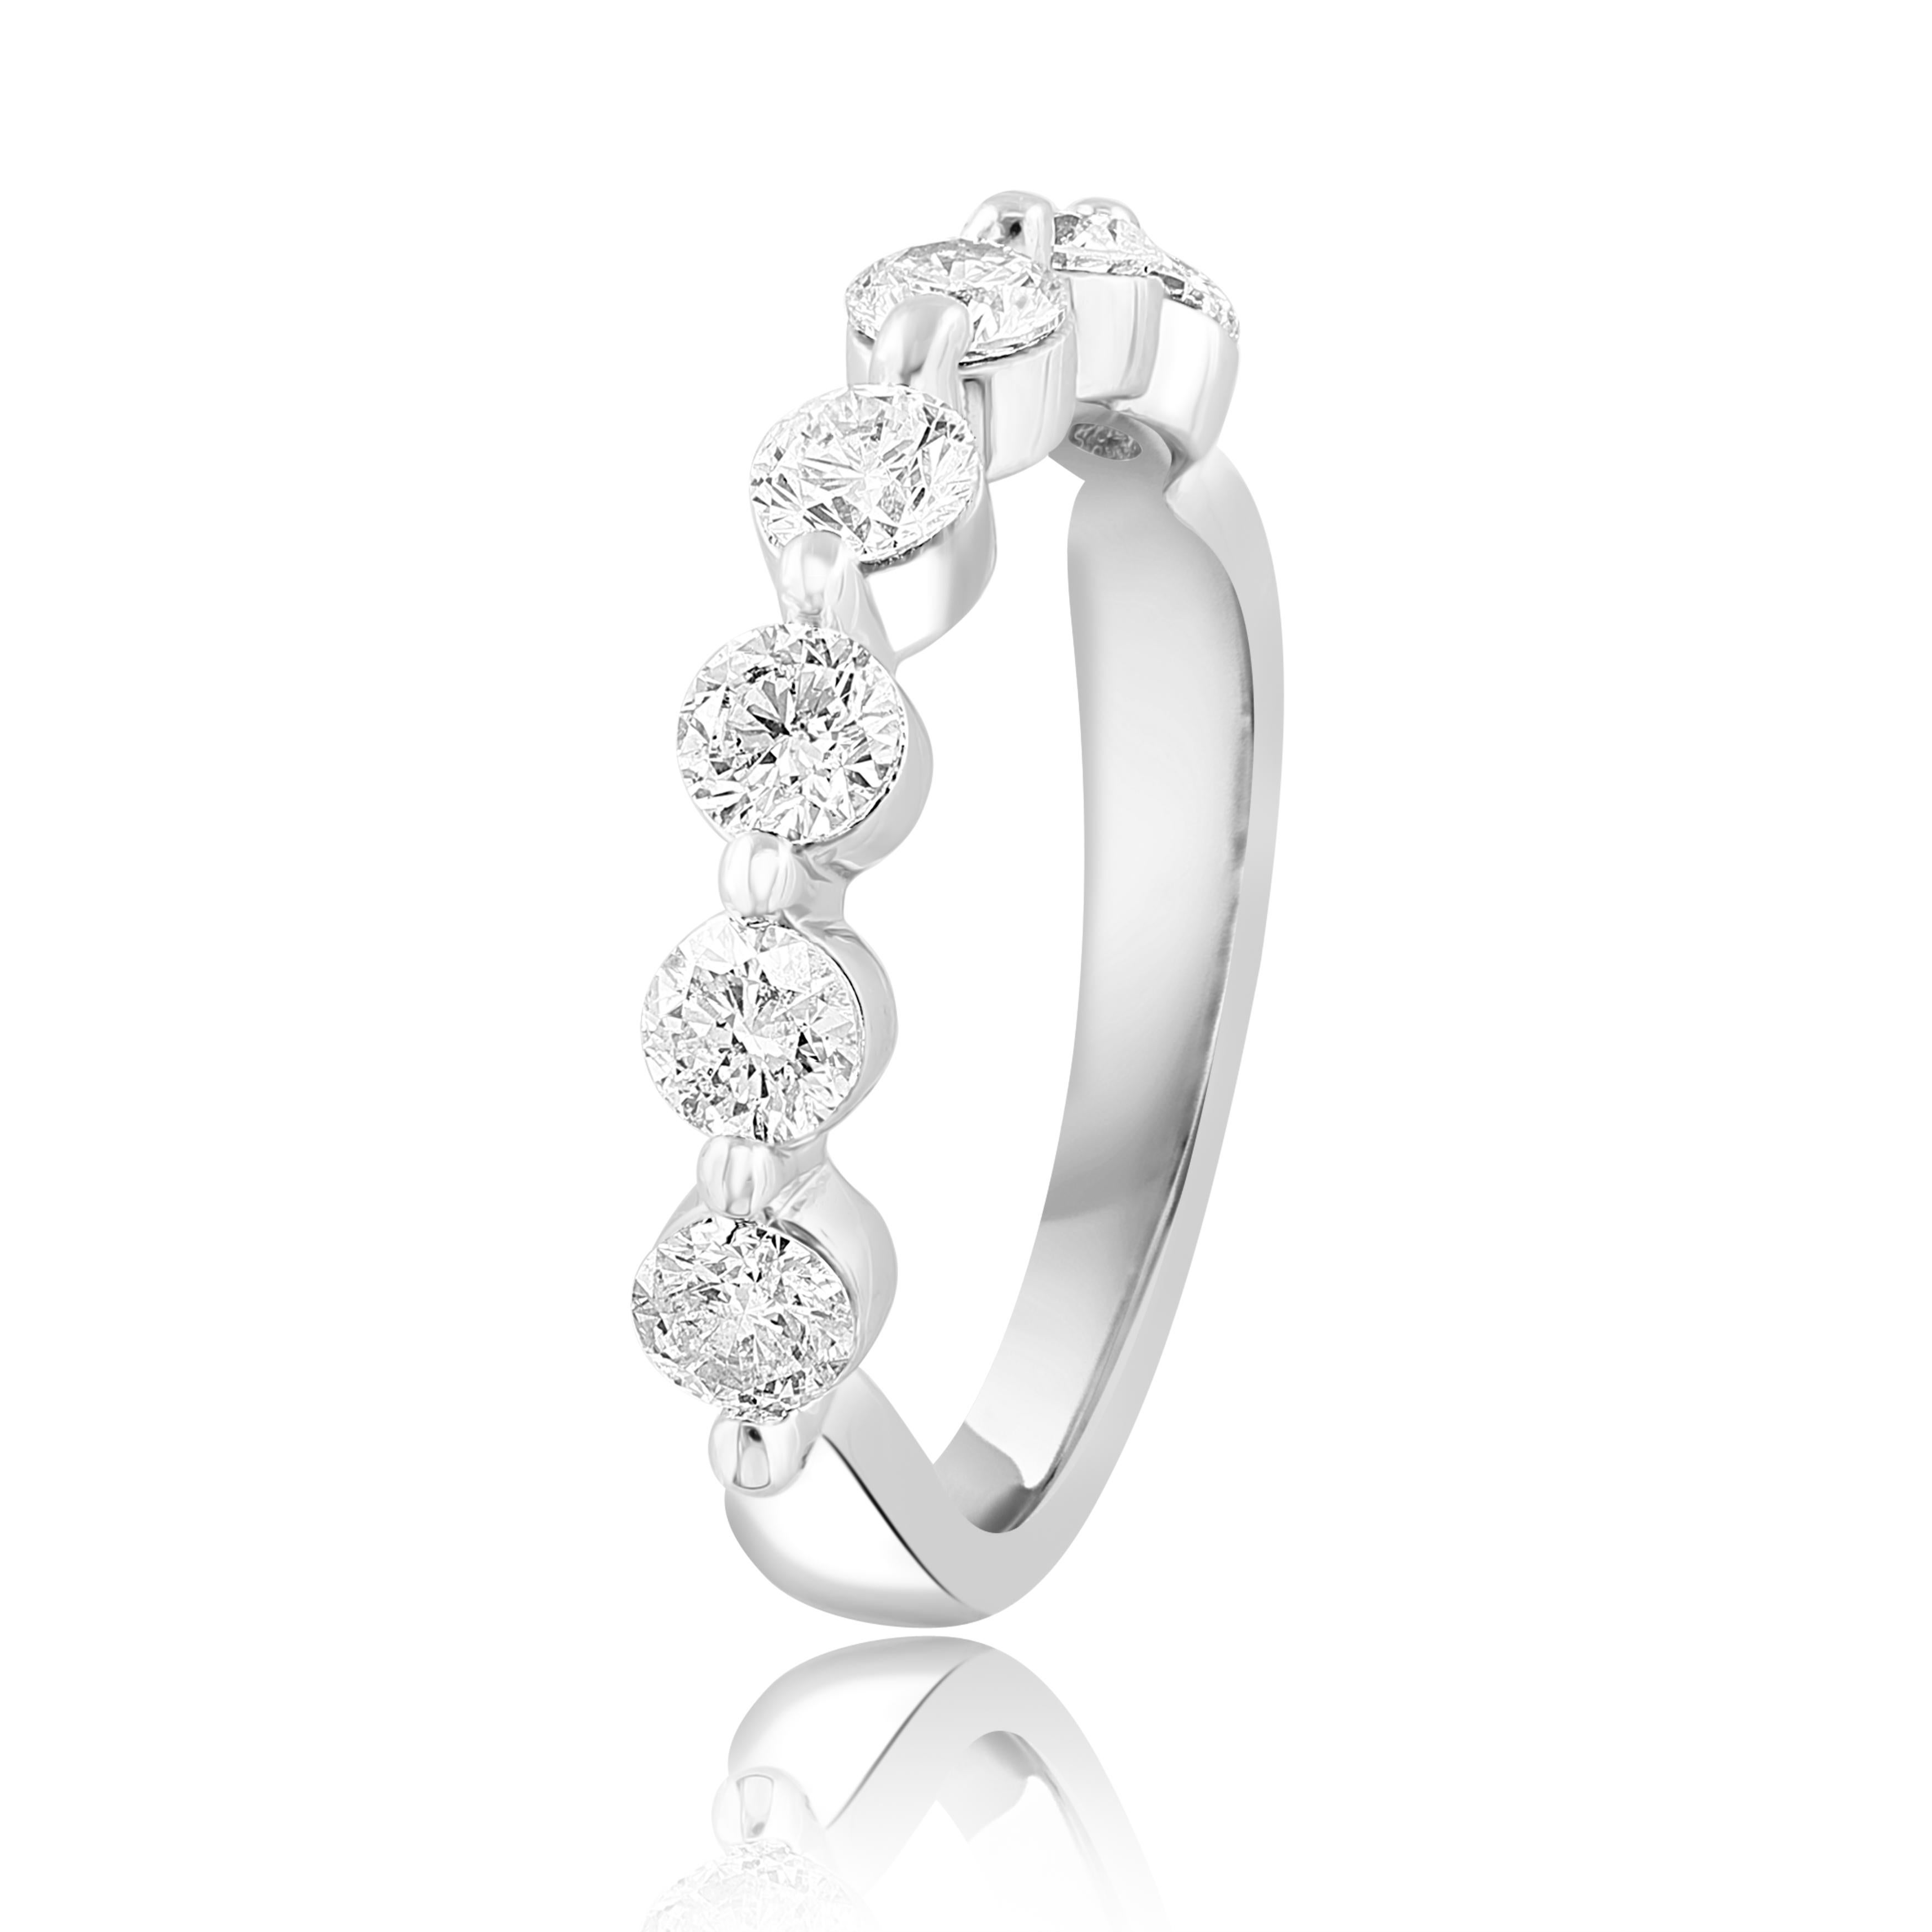 Contemporary 1.36 Carat Brilliant cut Diamond Halfway Wedding Band in 14K White Gold For Sale